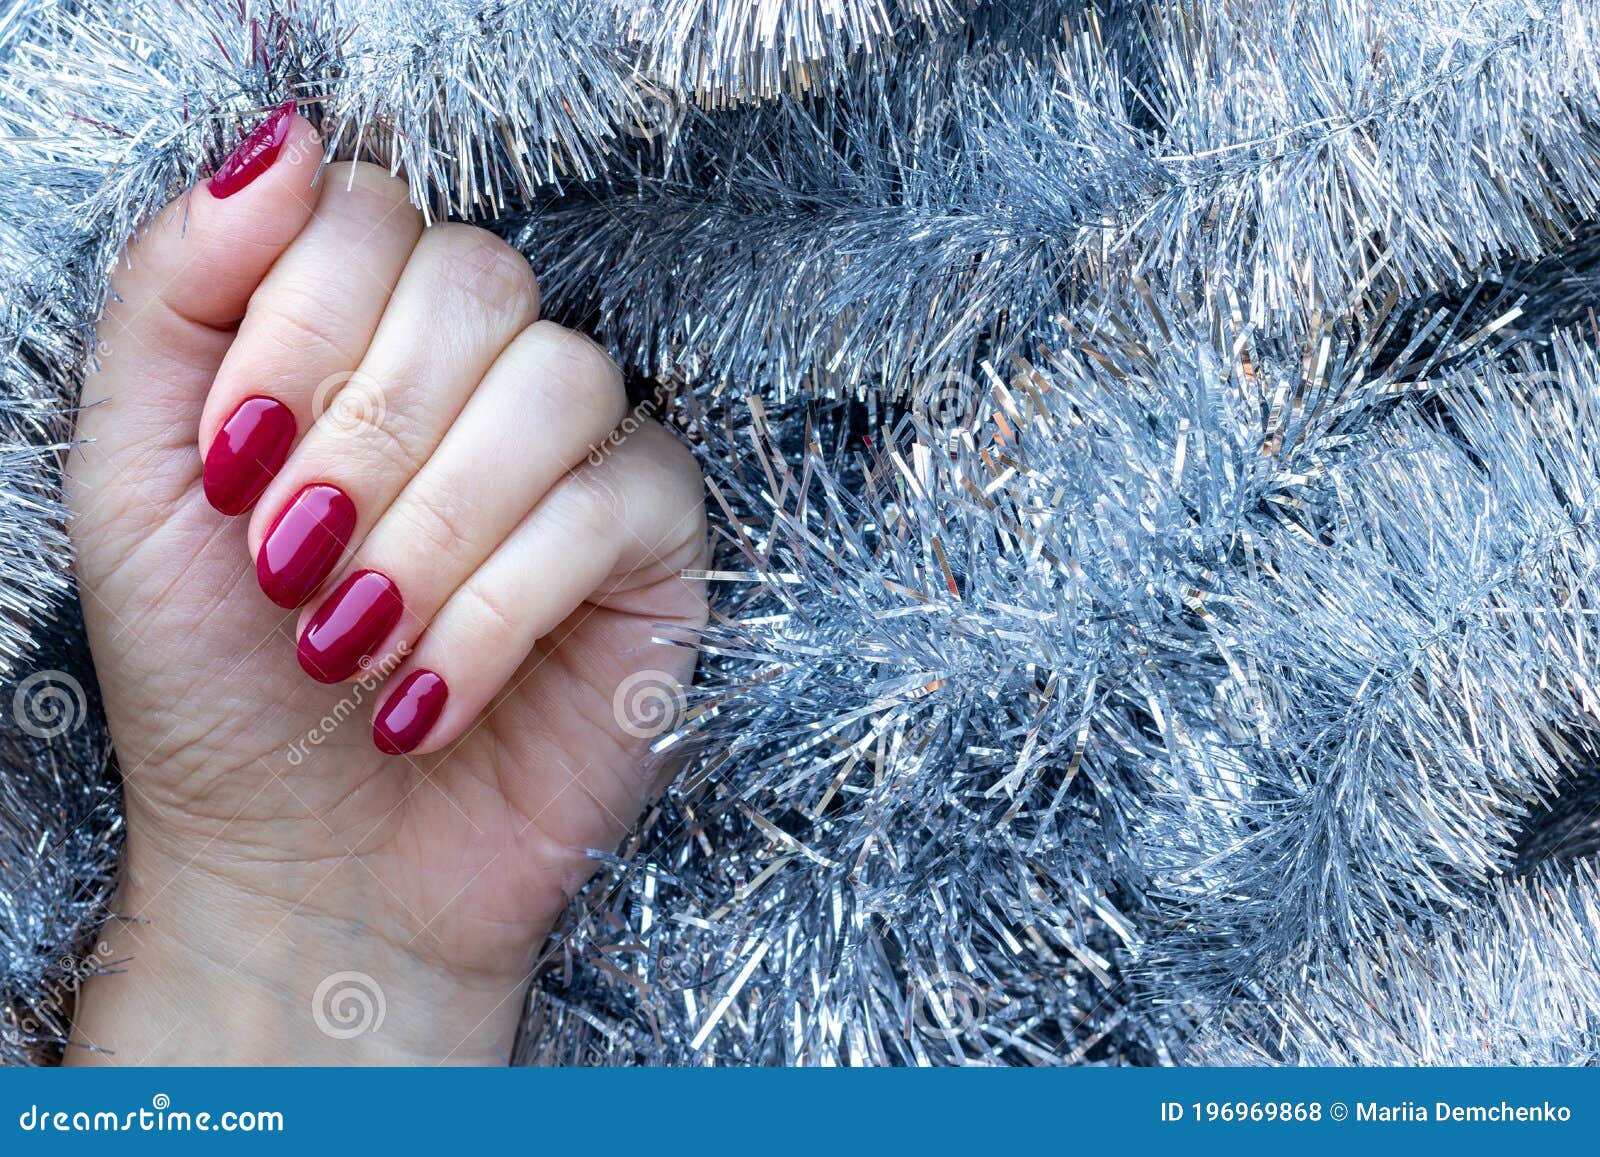 Female Hand with a Beautiful Glossy Manicure - Burgundy, Dark Red, Cherry  Color Nails on Background of Silver Christmas Tinsel Stock Photo - Image of  burgundy, care: 197056540